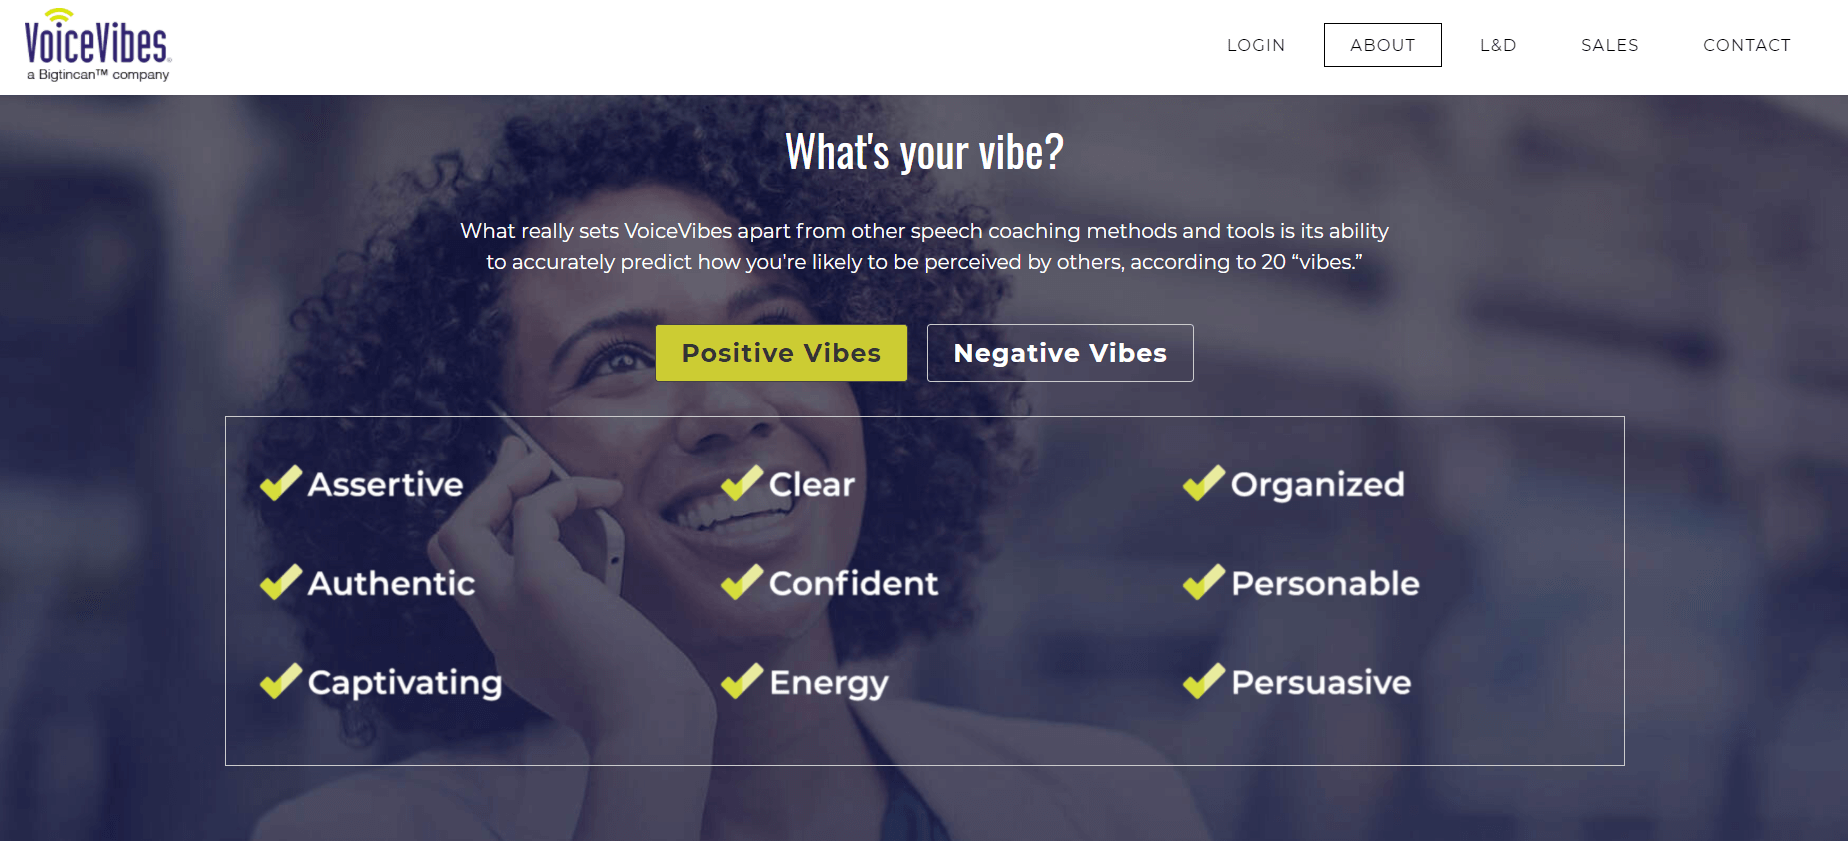 VoiceVibes homepage